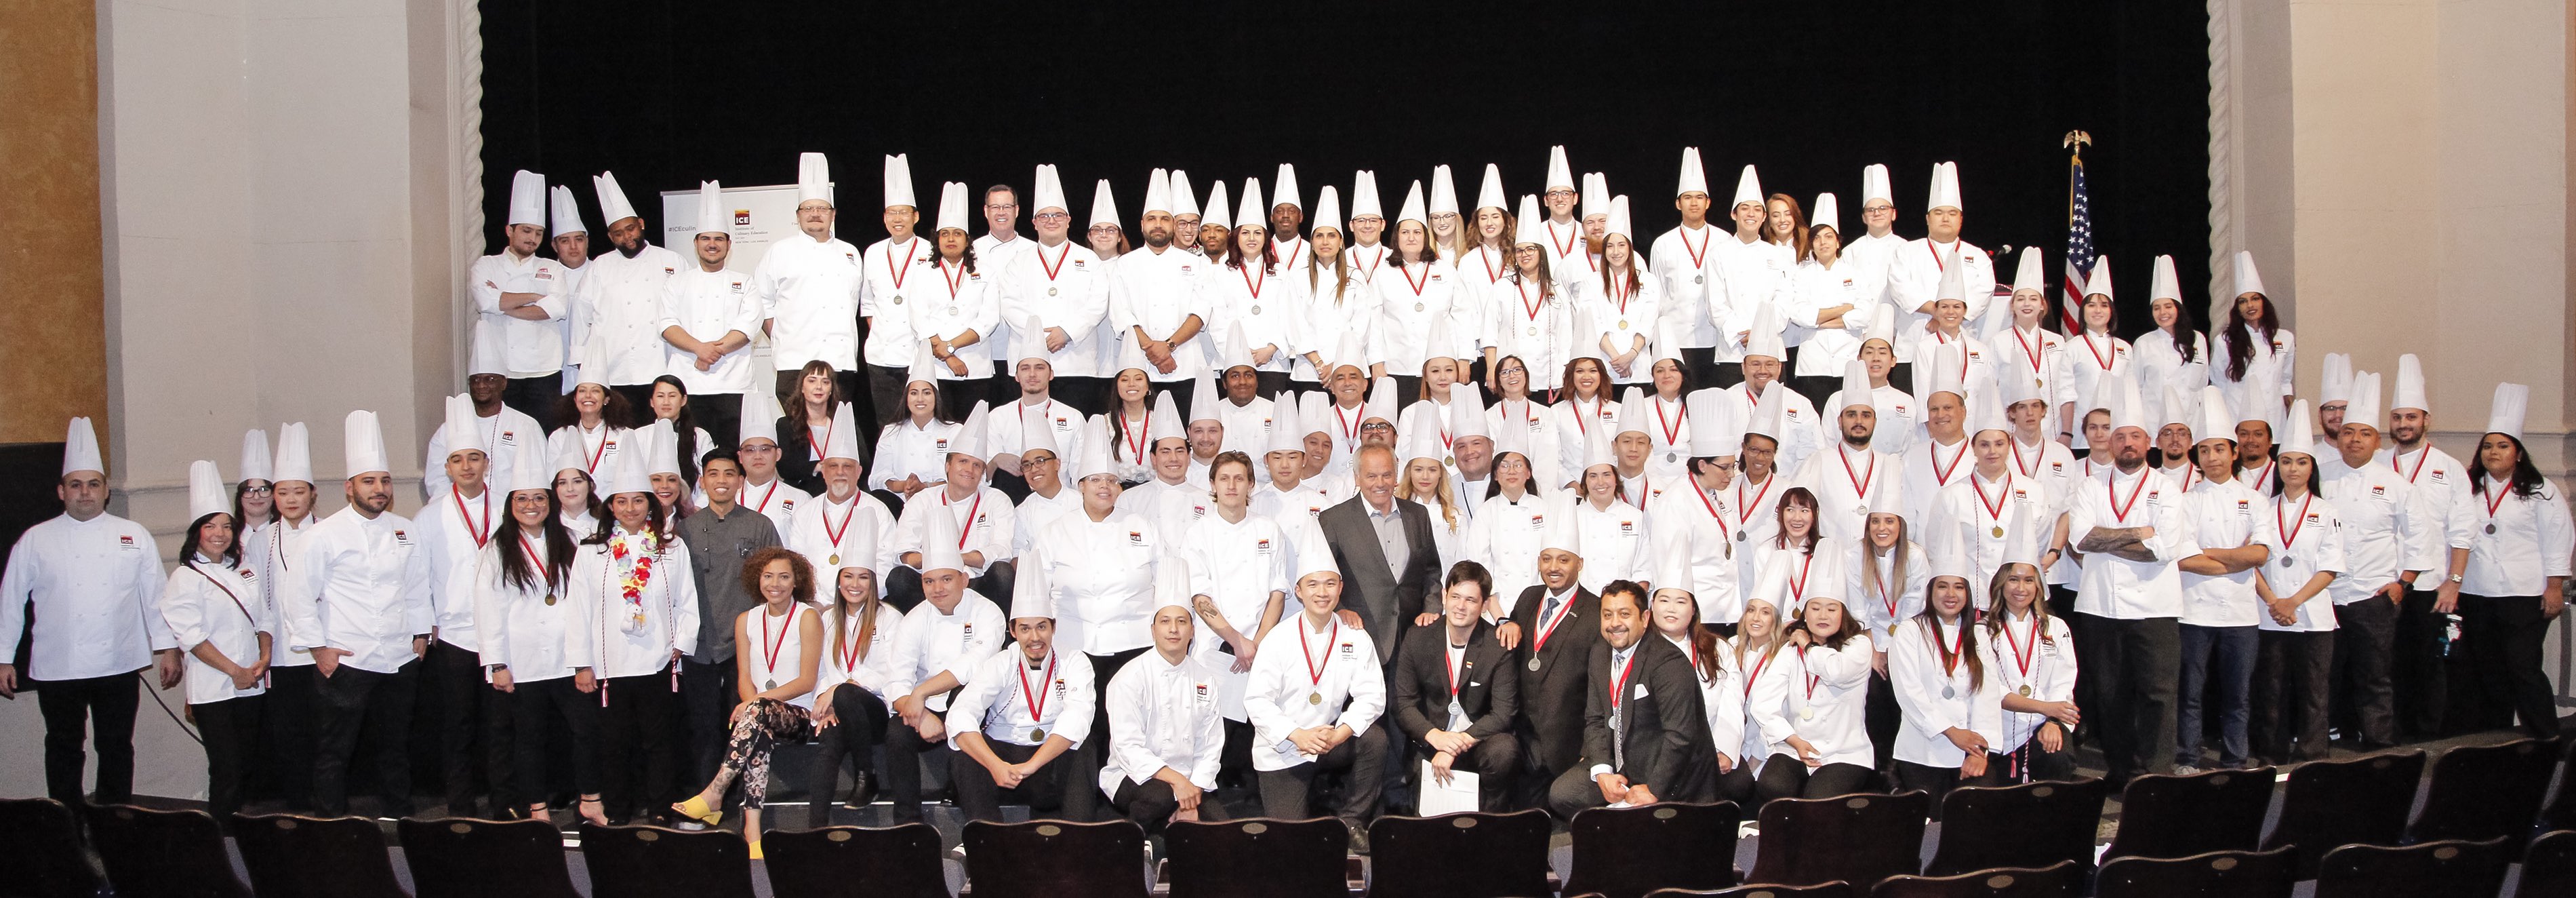 ICE LA's 2018-2019 graduates posed for a group photo with Chef Wolfgang Puck.